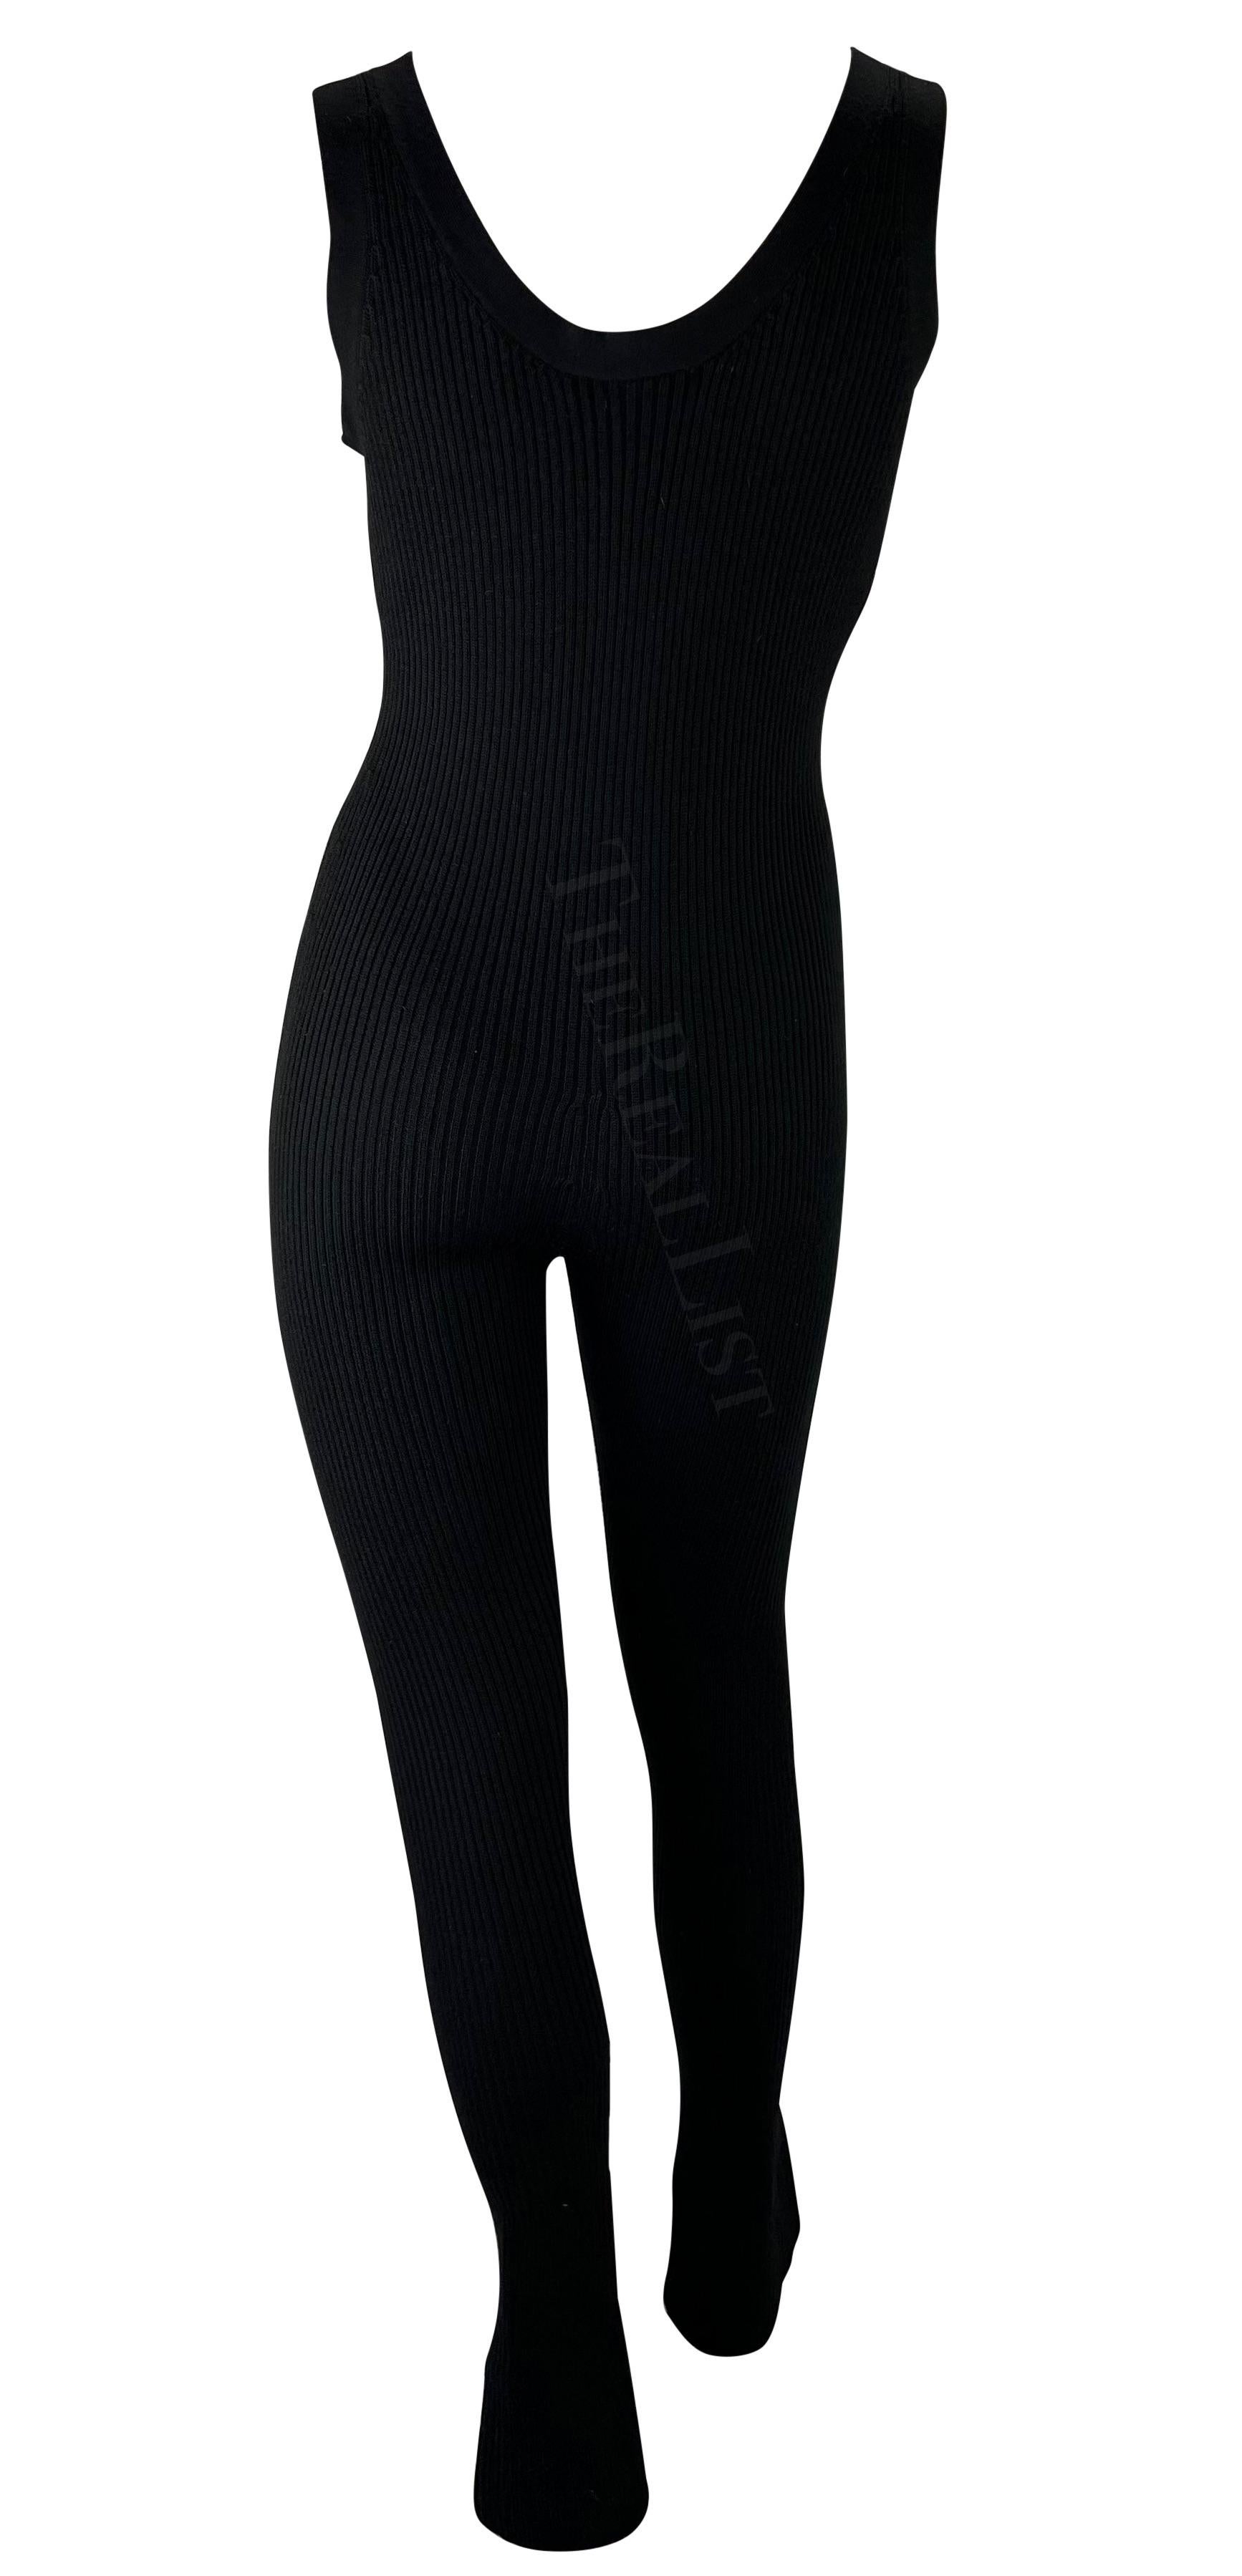 2000s Prada Black Ribbed Knit Stretch Tank Bell Bottom Catsuit Stirrup In Excellent Condition For Sale In West Hollywood, CA